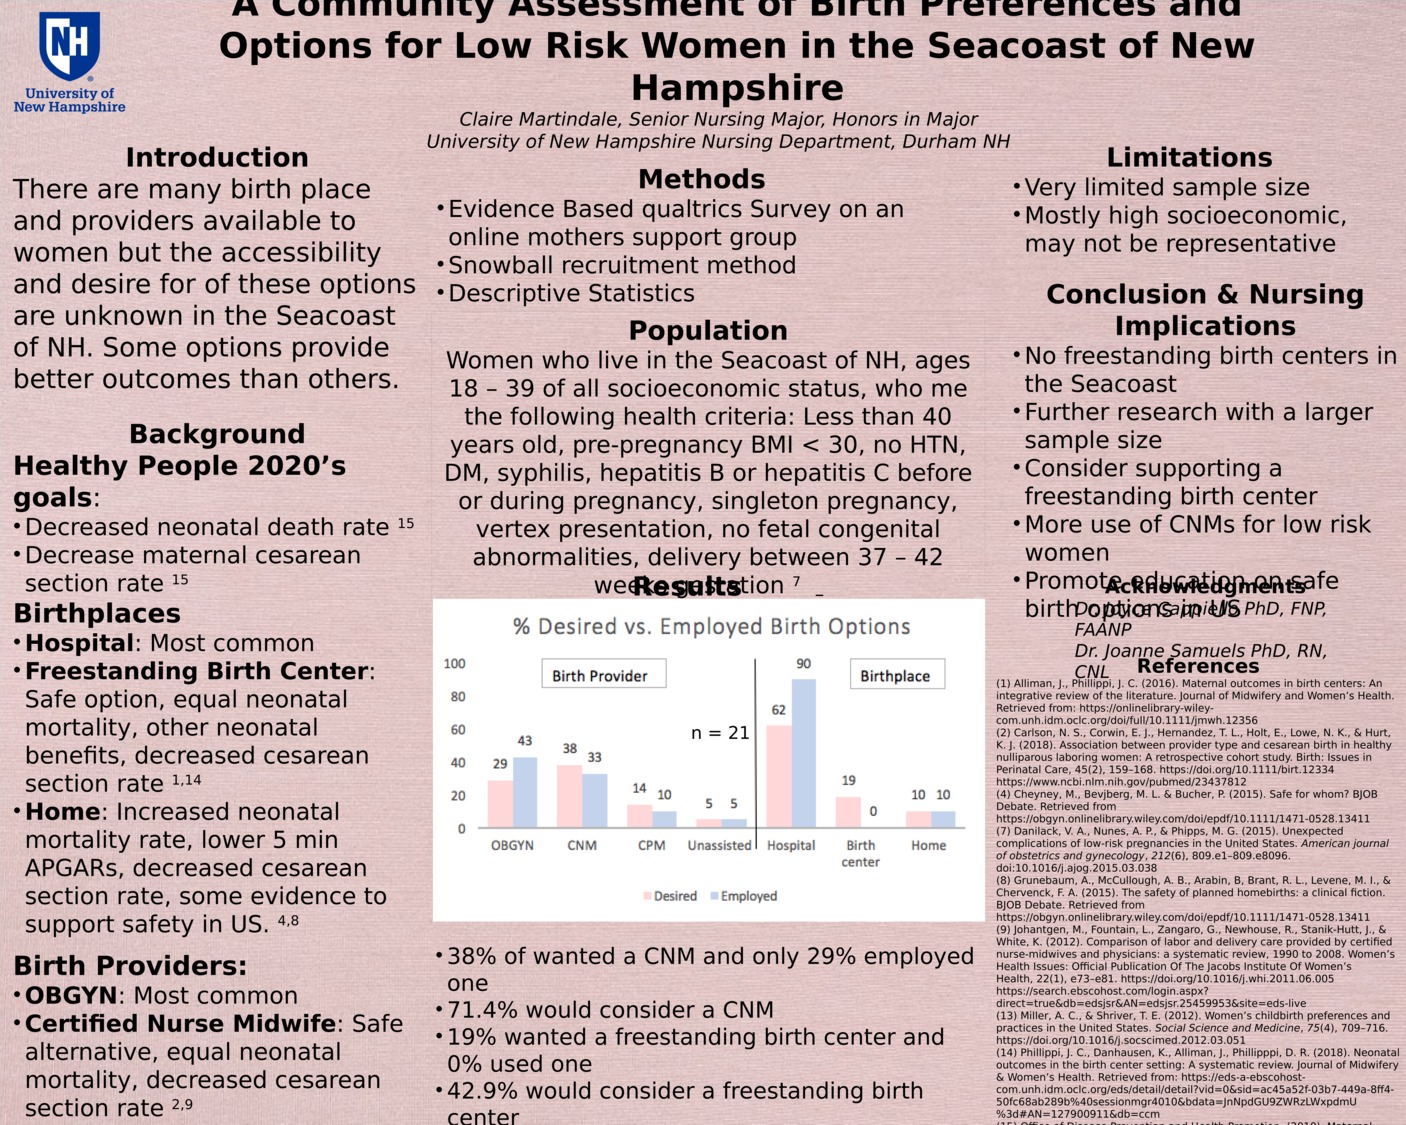 A Community Assessment Of Birth Preferences And Options For Low Risk Women In The Seacoast Of New Hampshire by cmm2024